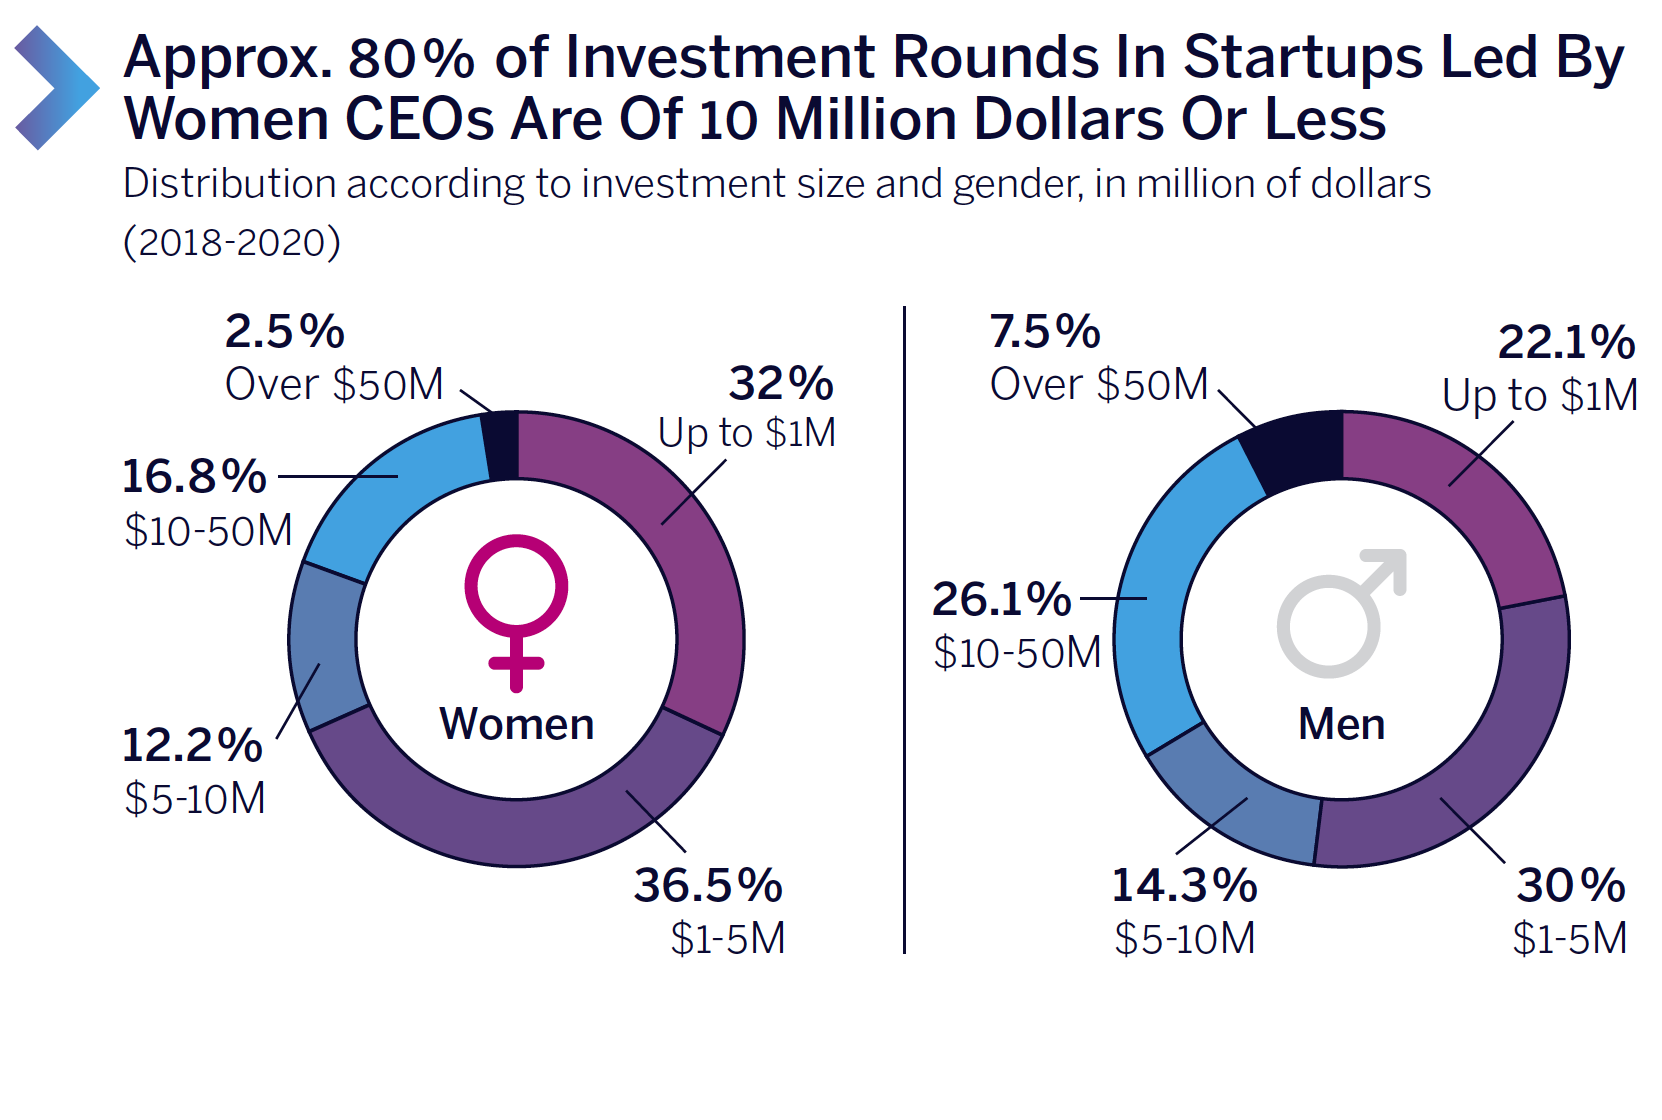 Approx. 80% of Investment Rounds In Startups Led By Women CEOs Are Of 10 Million Dollars Or Less